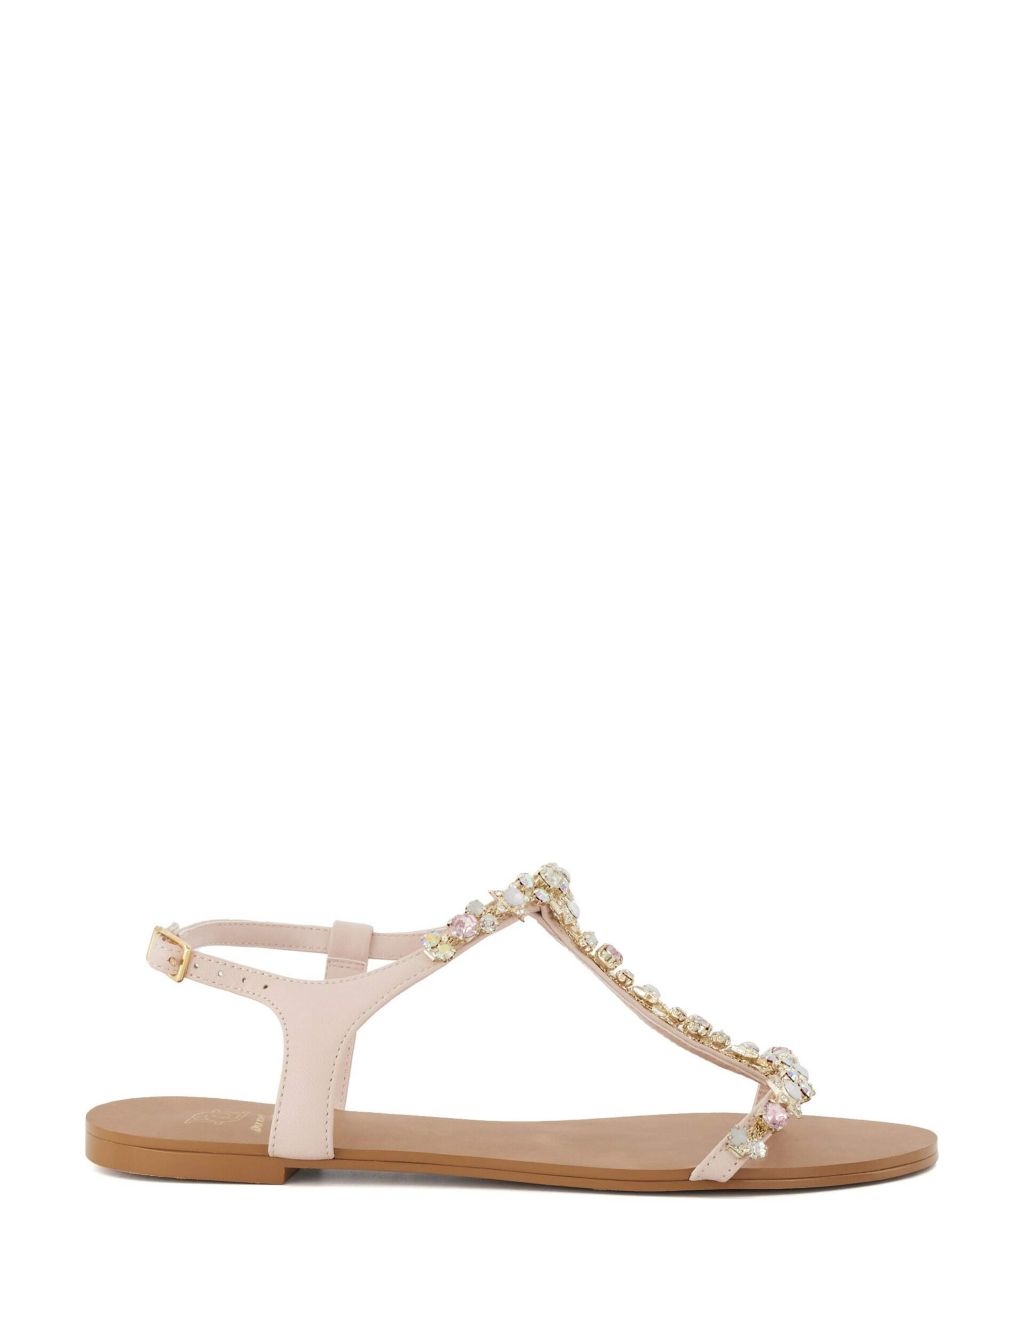 Jewelled Strappy Flat Sandals image 1